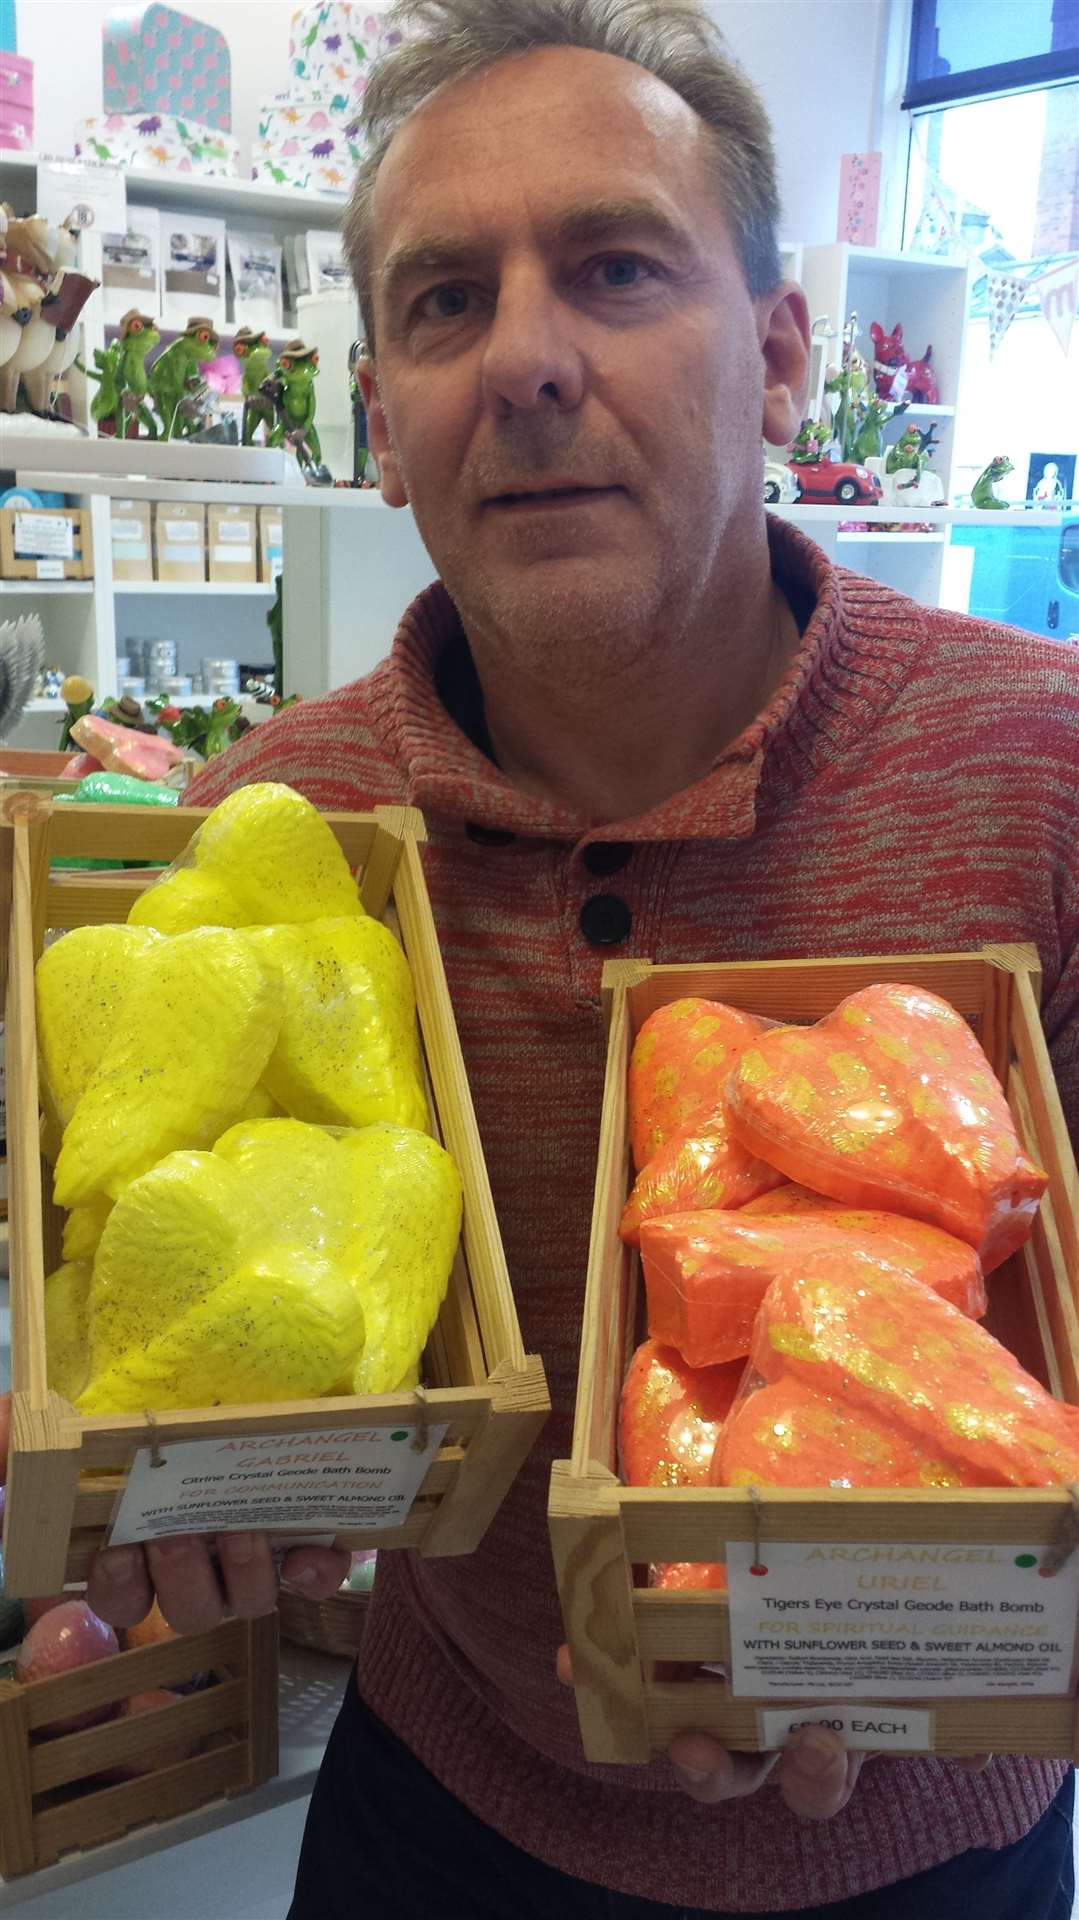 Owner of Bonne Bombe Michael Wood with the £5 bath bombs he is offering as part of the Fiver Fest scheme